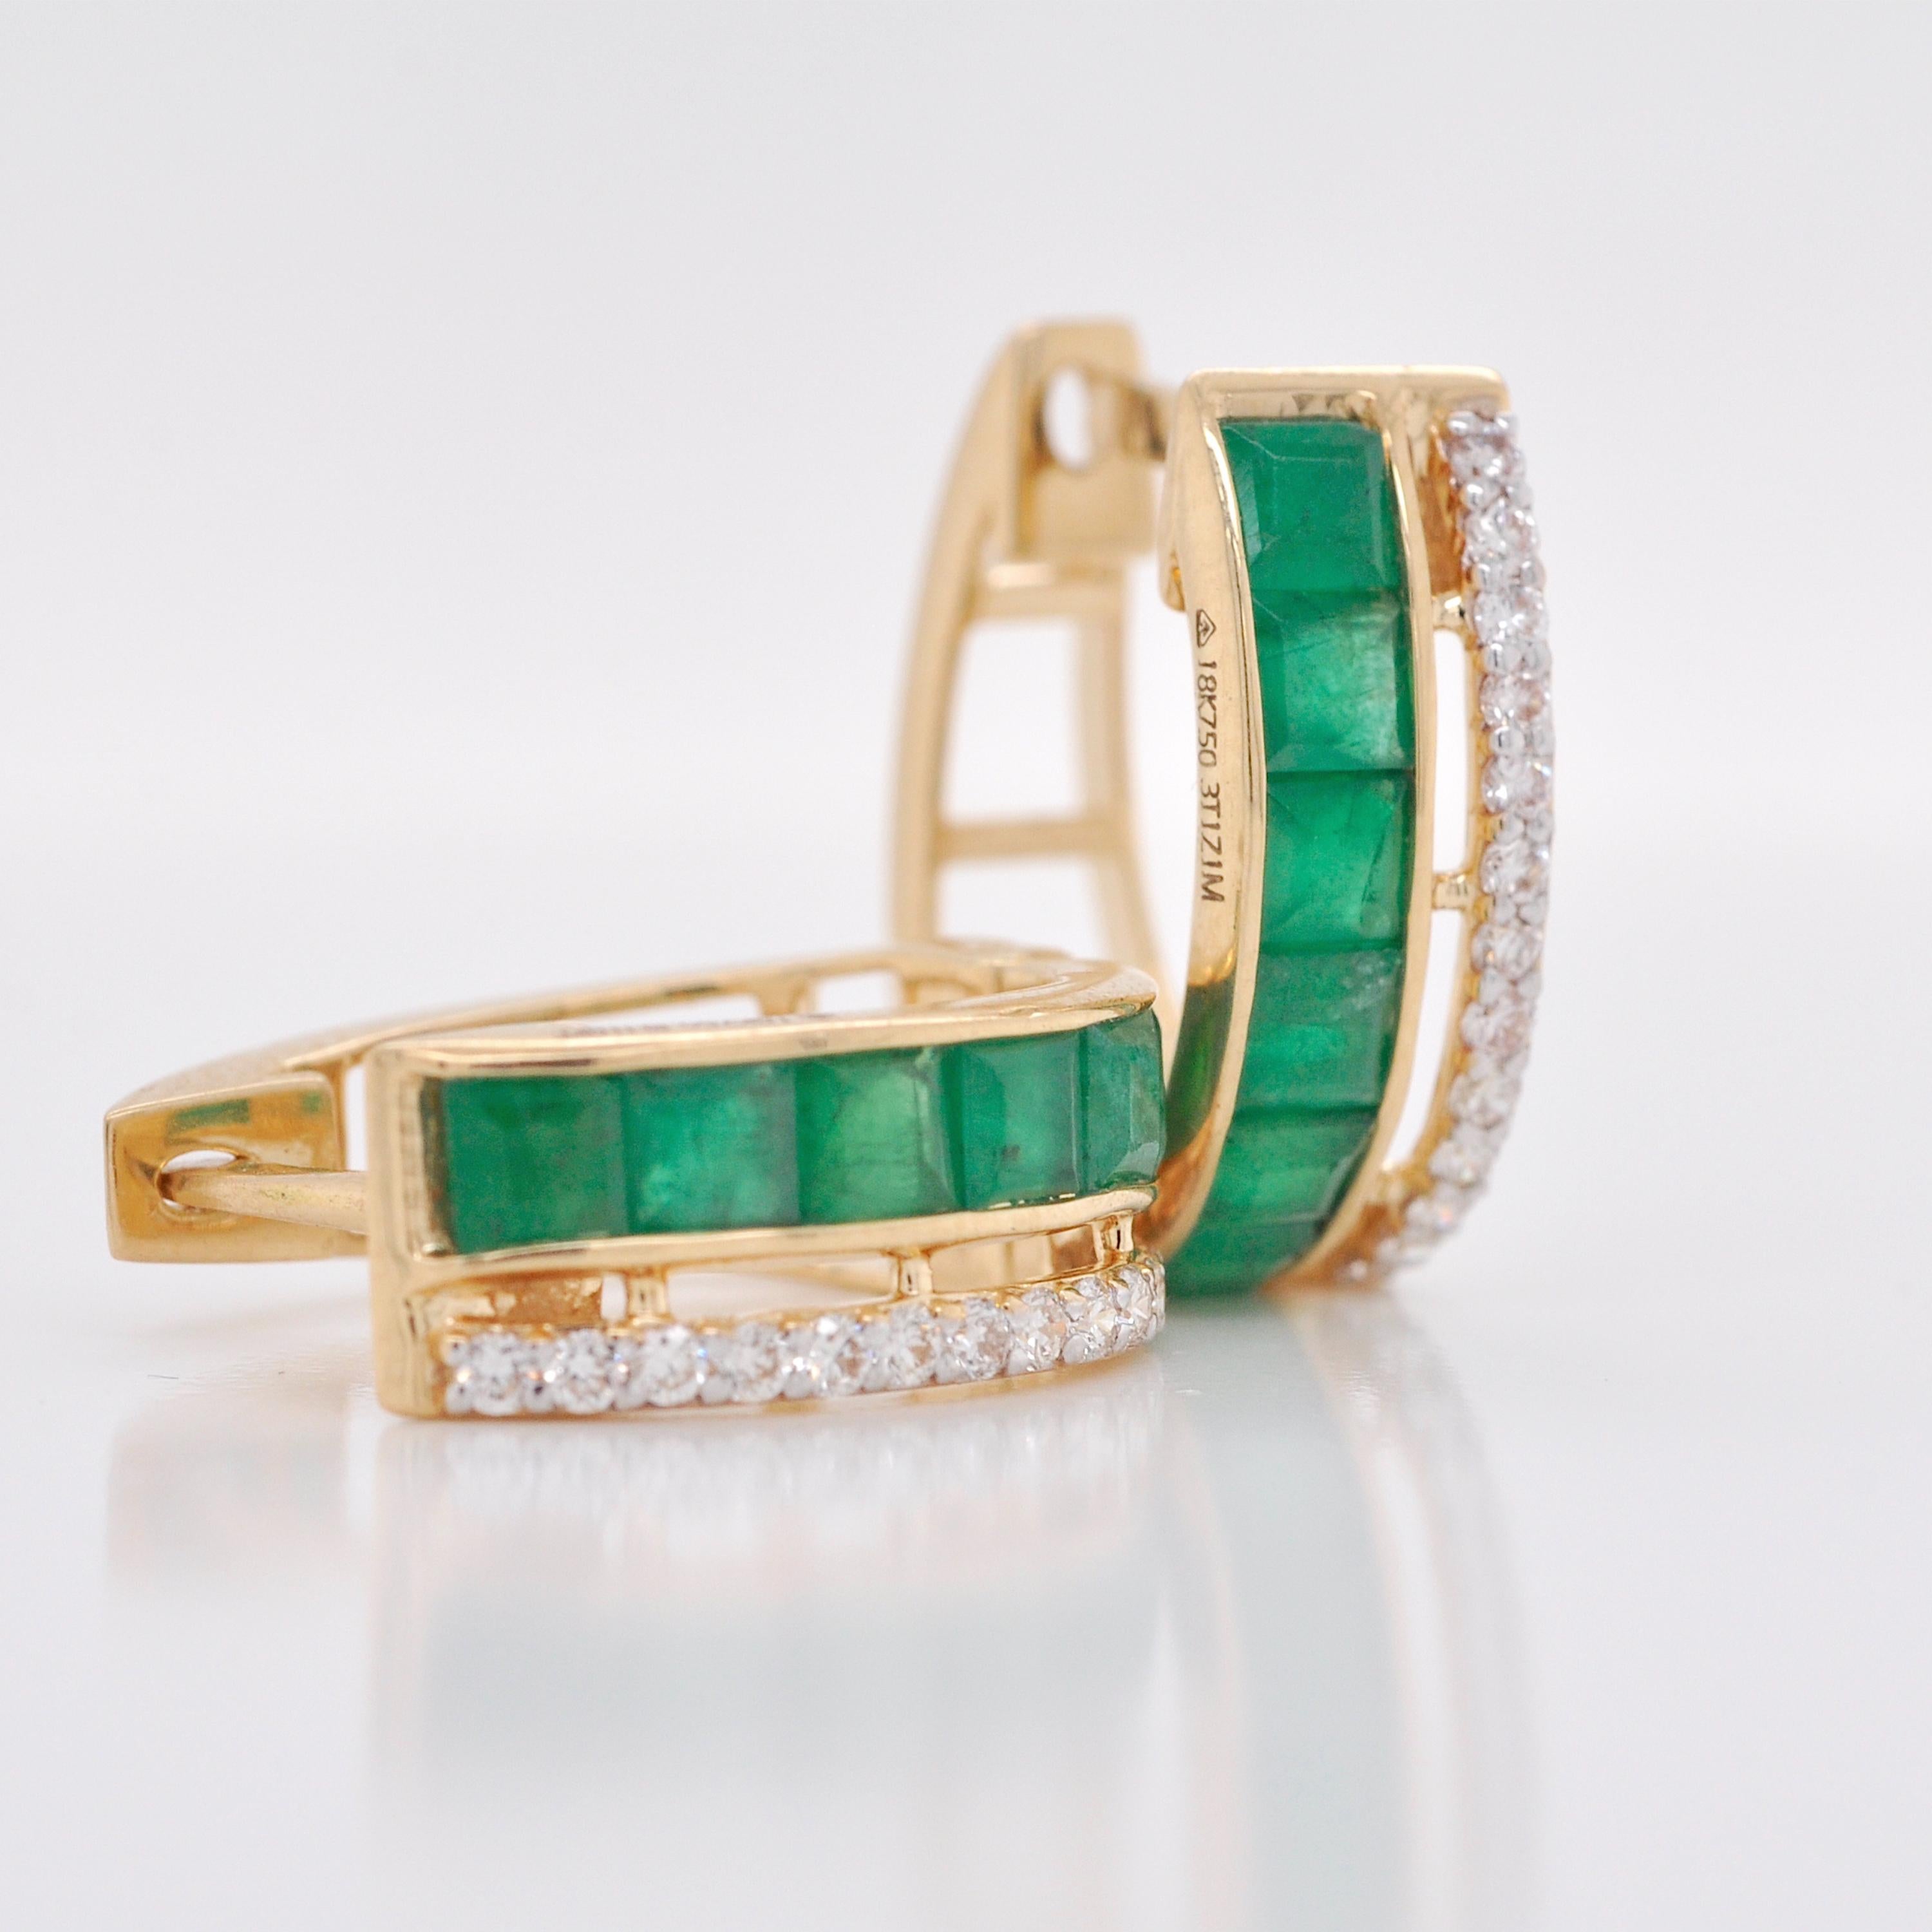 18K Yellow Gold 3 MM Square Channel-Set Brazilian Emerald Diamond Hoop Earrings In New Condition For Sale In Jaipur, Rajasthan